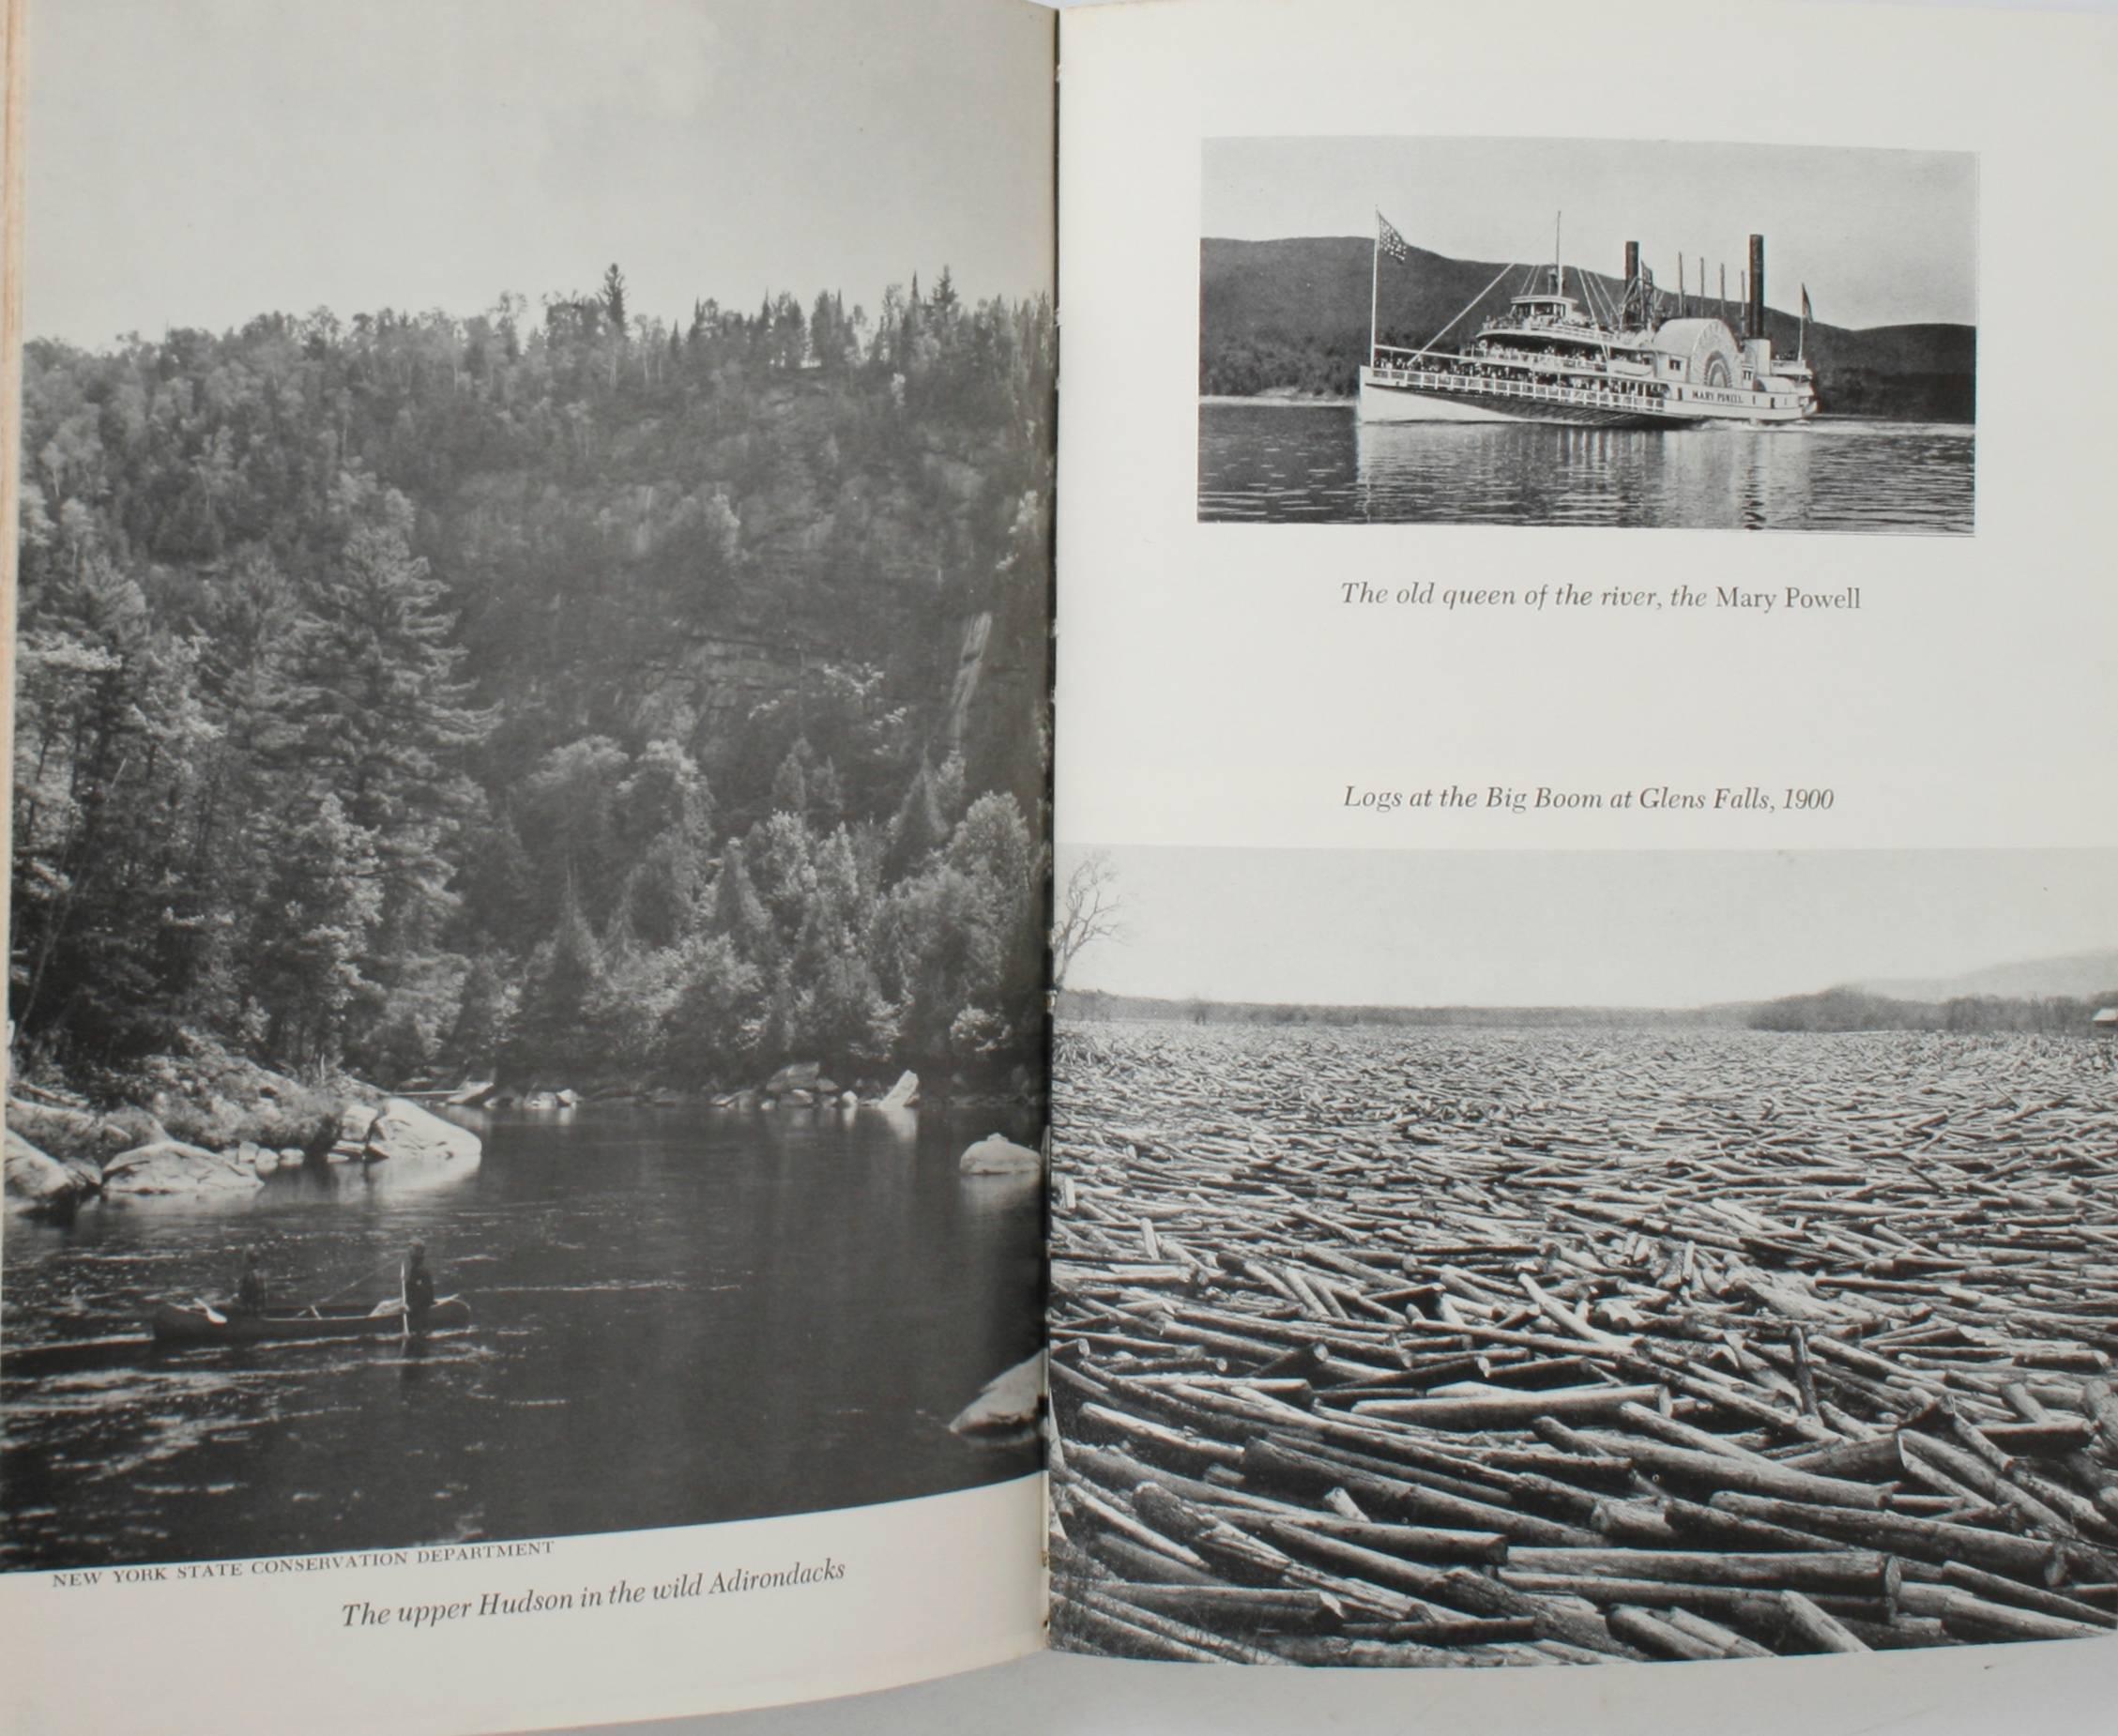 The Hudson River, A Natural and Unnatural History by Robert H. Boyle. New York: W. W. Norton and Company Inc, 1969. Hardcover with dust jacket. A history book on the mysterious and diverse Hudson River. It describes the river as a trout stream, an